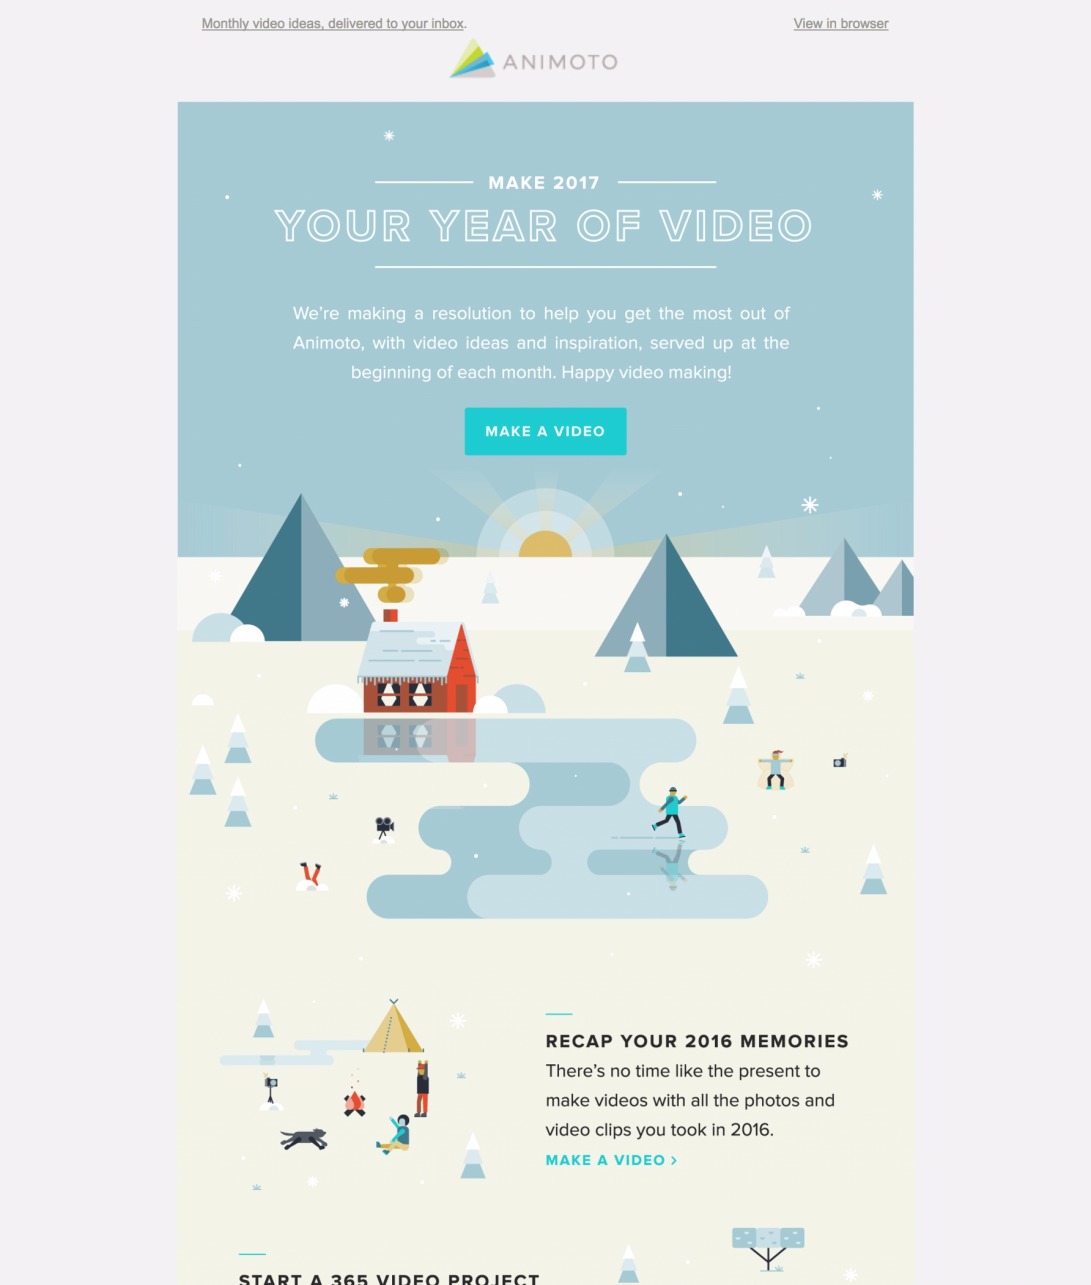 Get the most out of Animoto, all year long.